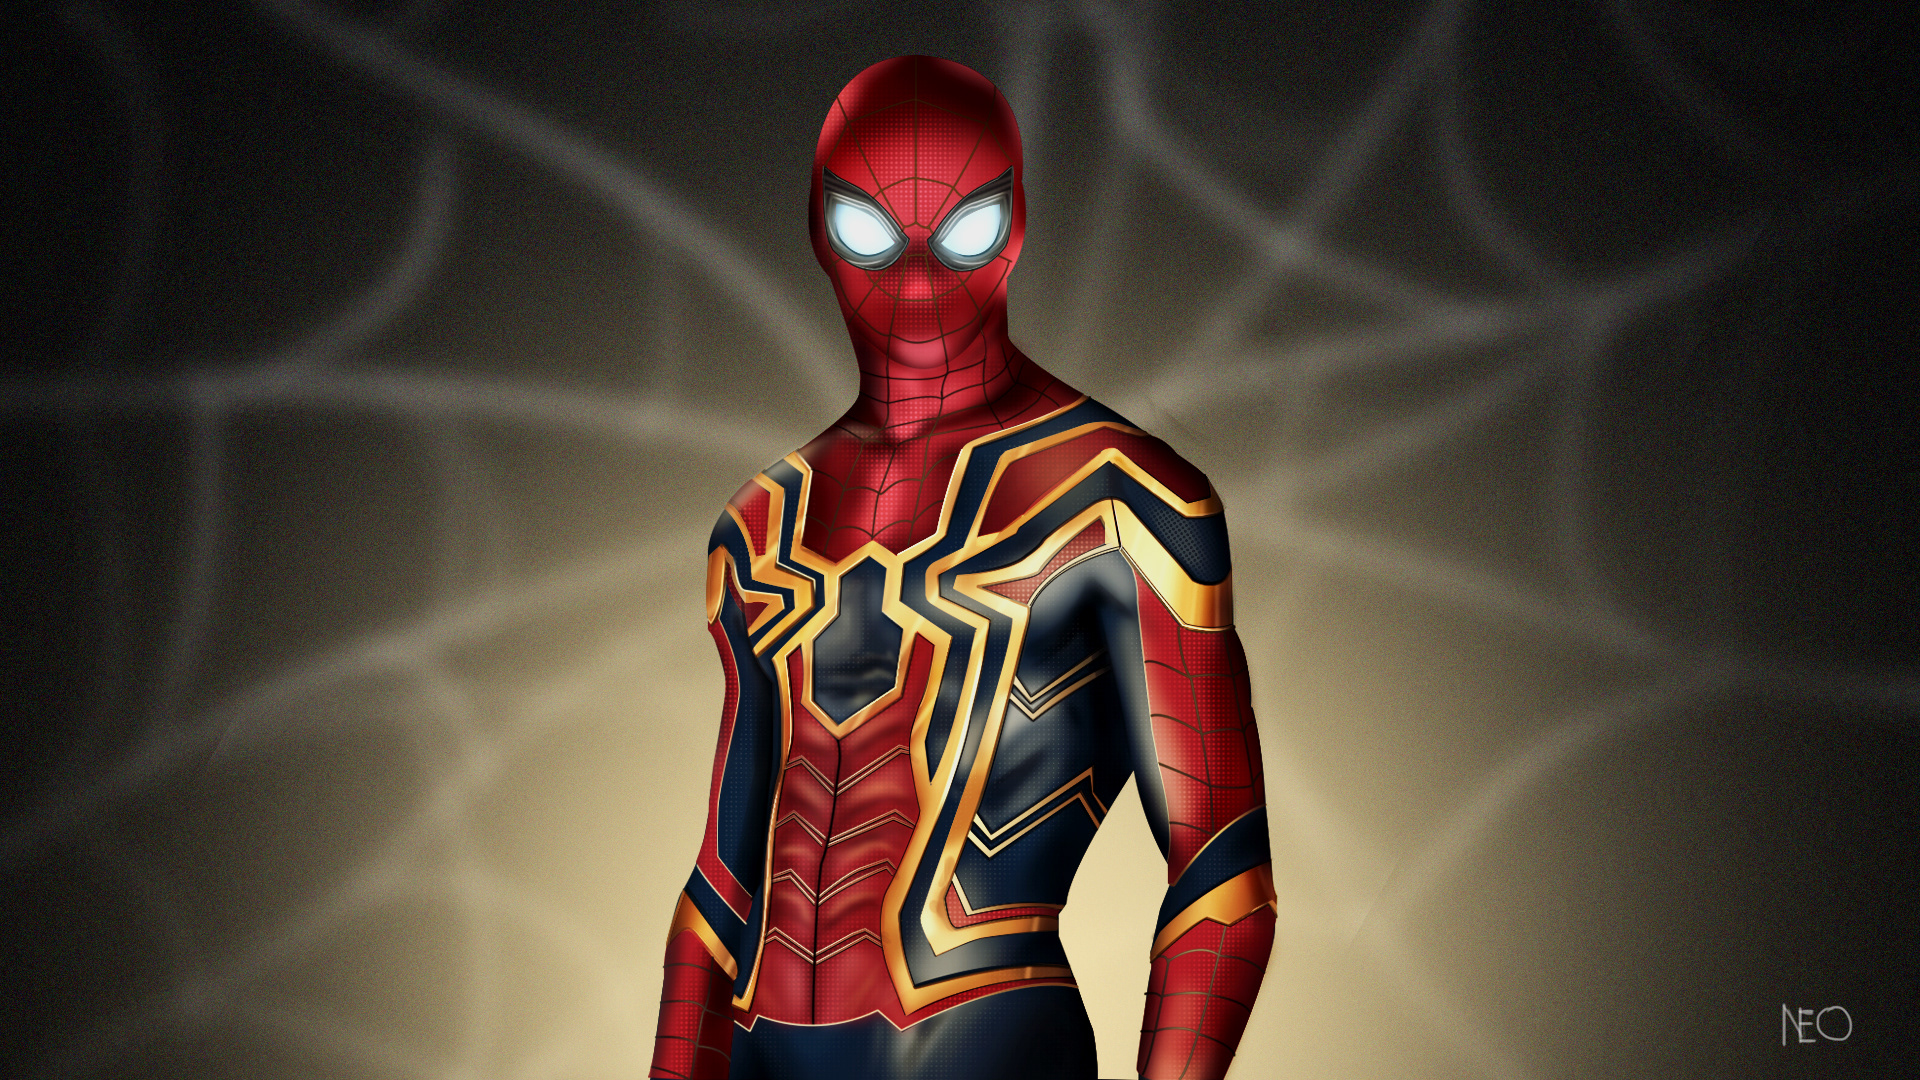 The iron spider hd superheroes k wallpapers images backgrounds photos and pictures